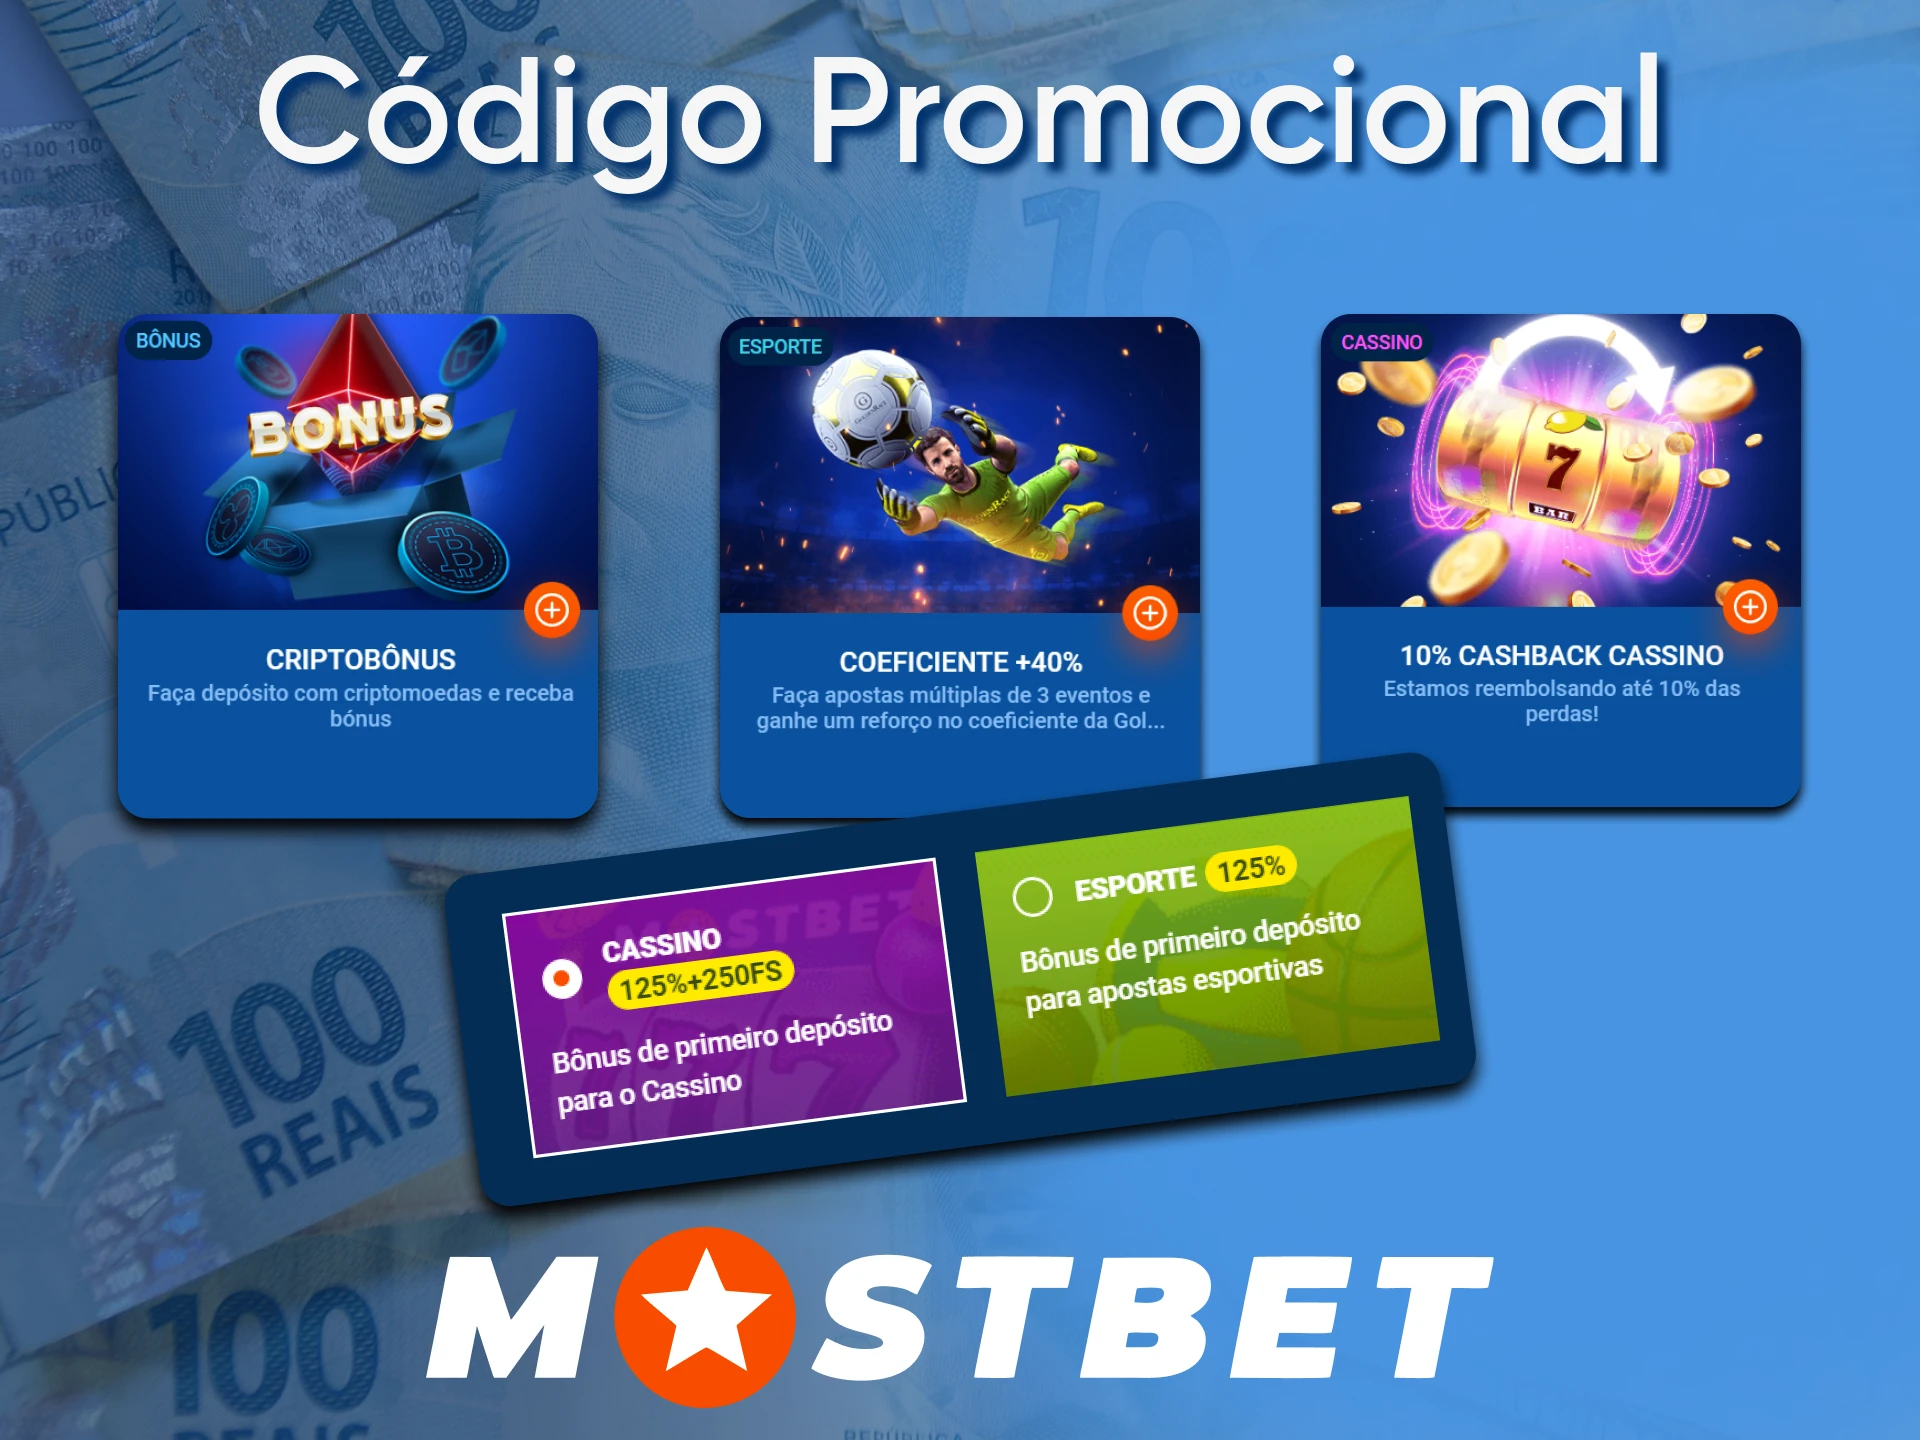 Use the Mostbet promo code to register your account.